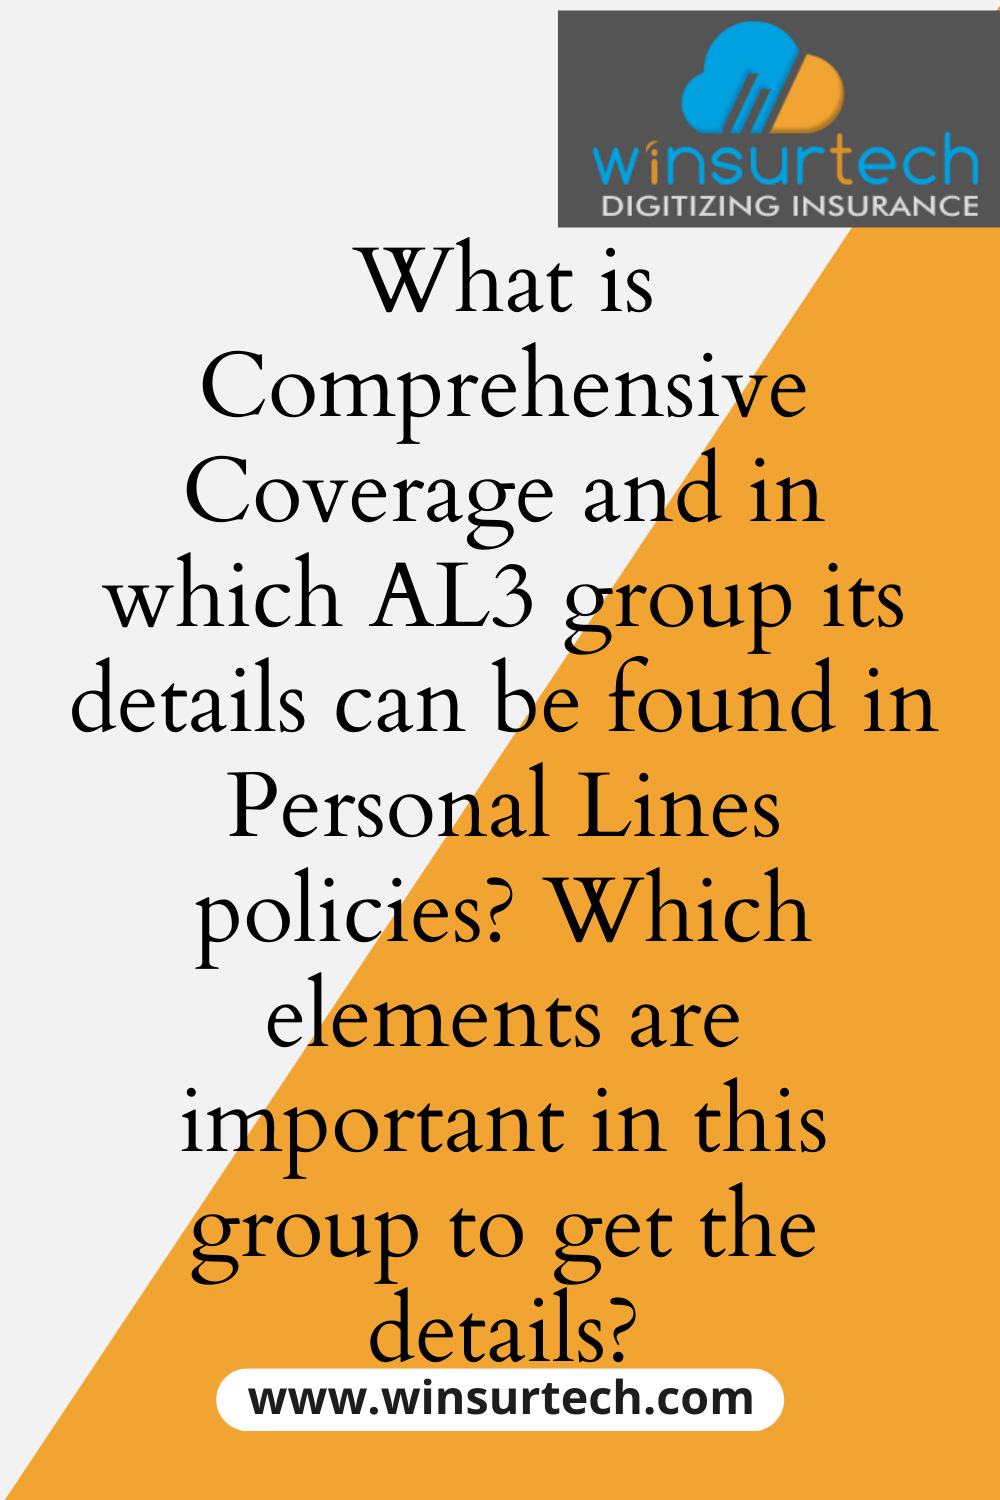 What is Comprehensive Coverage and in which AL3 group its details can be found in Personal Lines policies?